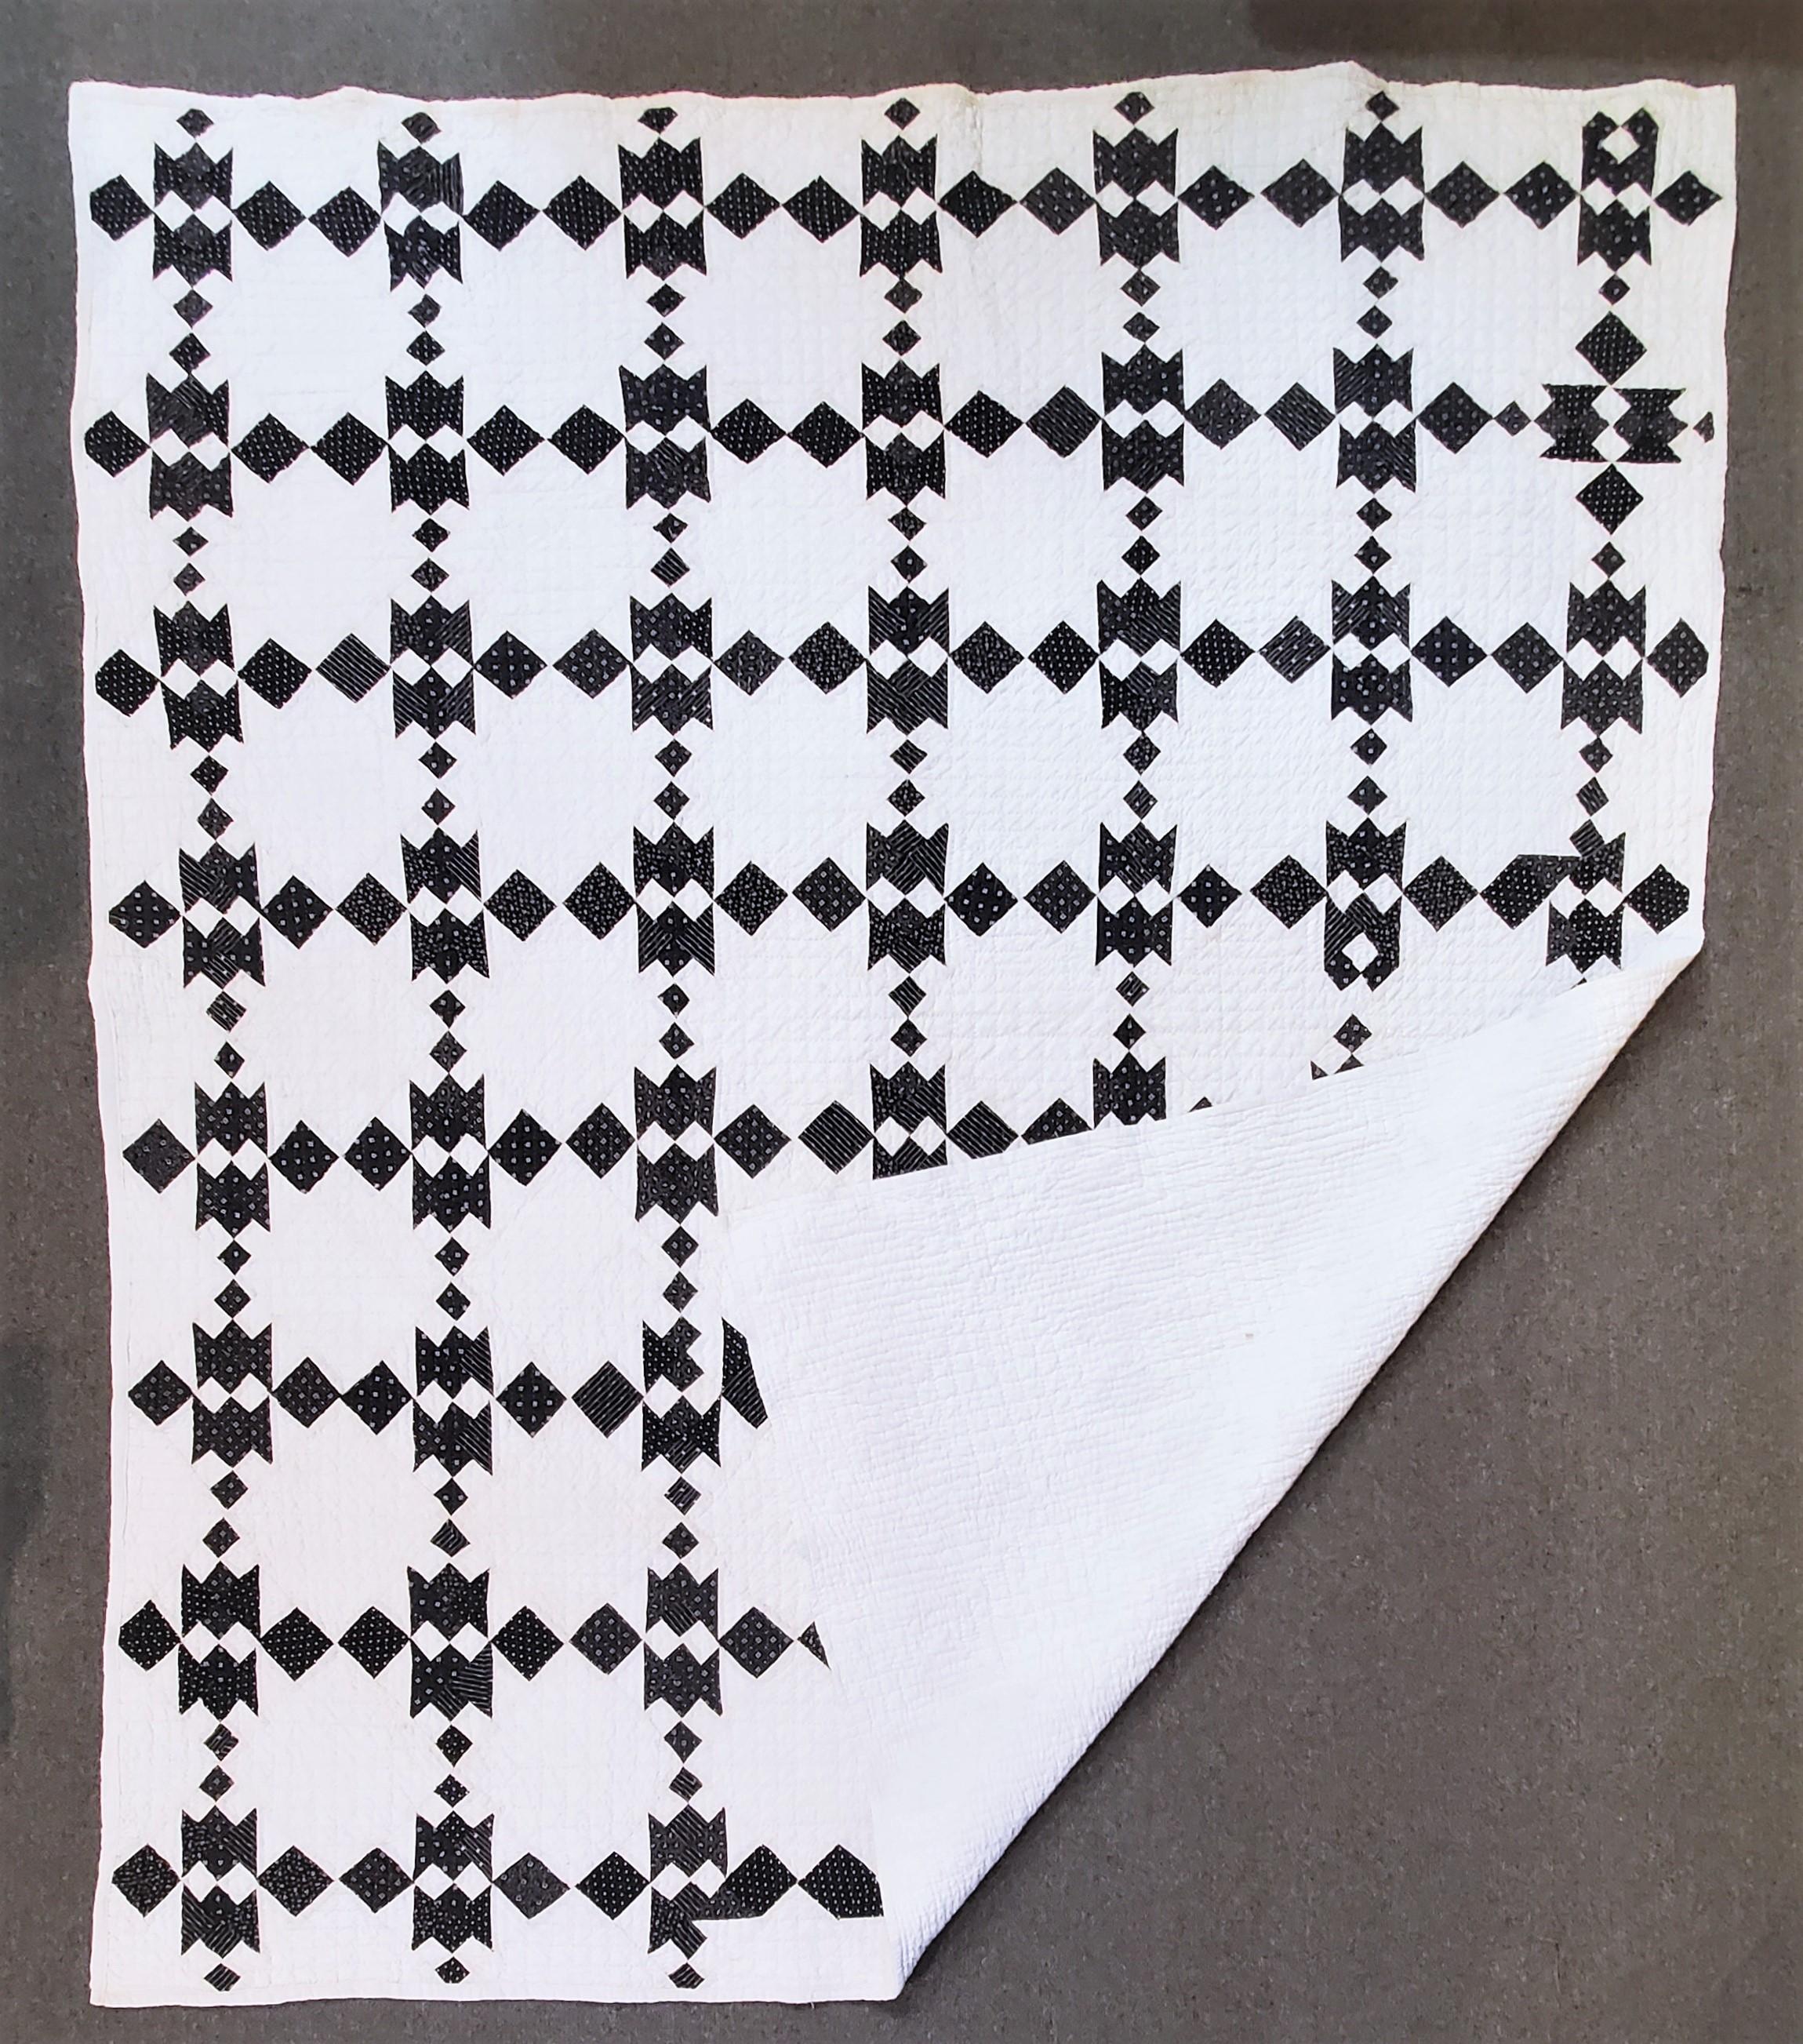 This fine very hard to find black and white 19th century geometric quilt is in good condition. The black and white calico quilts are so rare to find in such good condition.